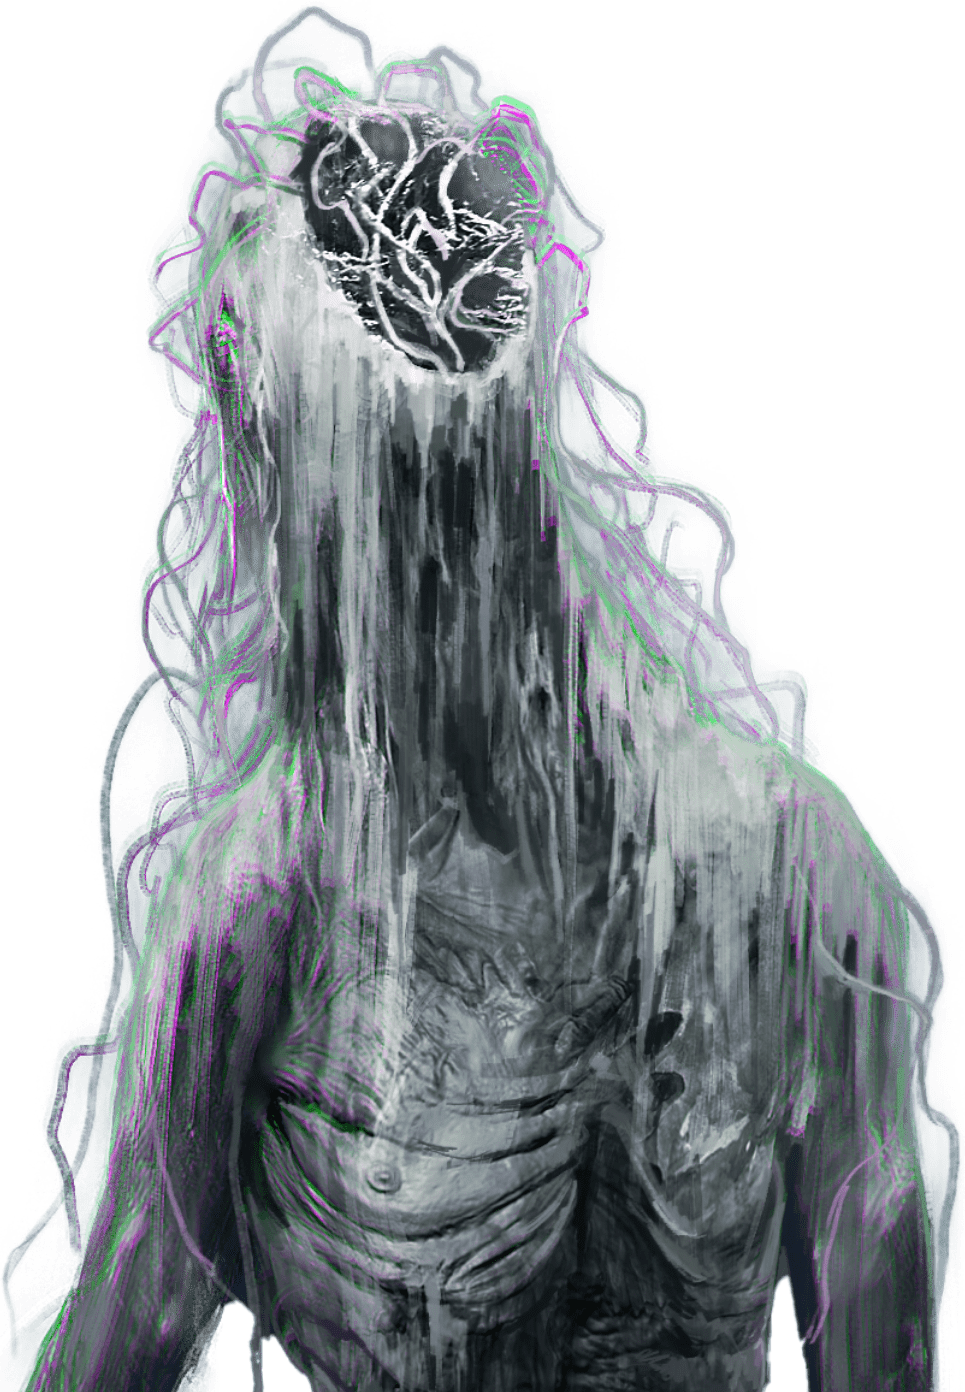 A figure corrupted in the realm of umbral, part of his head can be seen missing with wisps branching out around its body from the world of The Lords of the Fallen